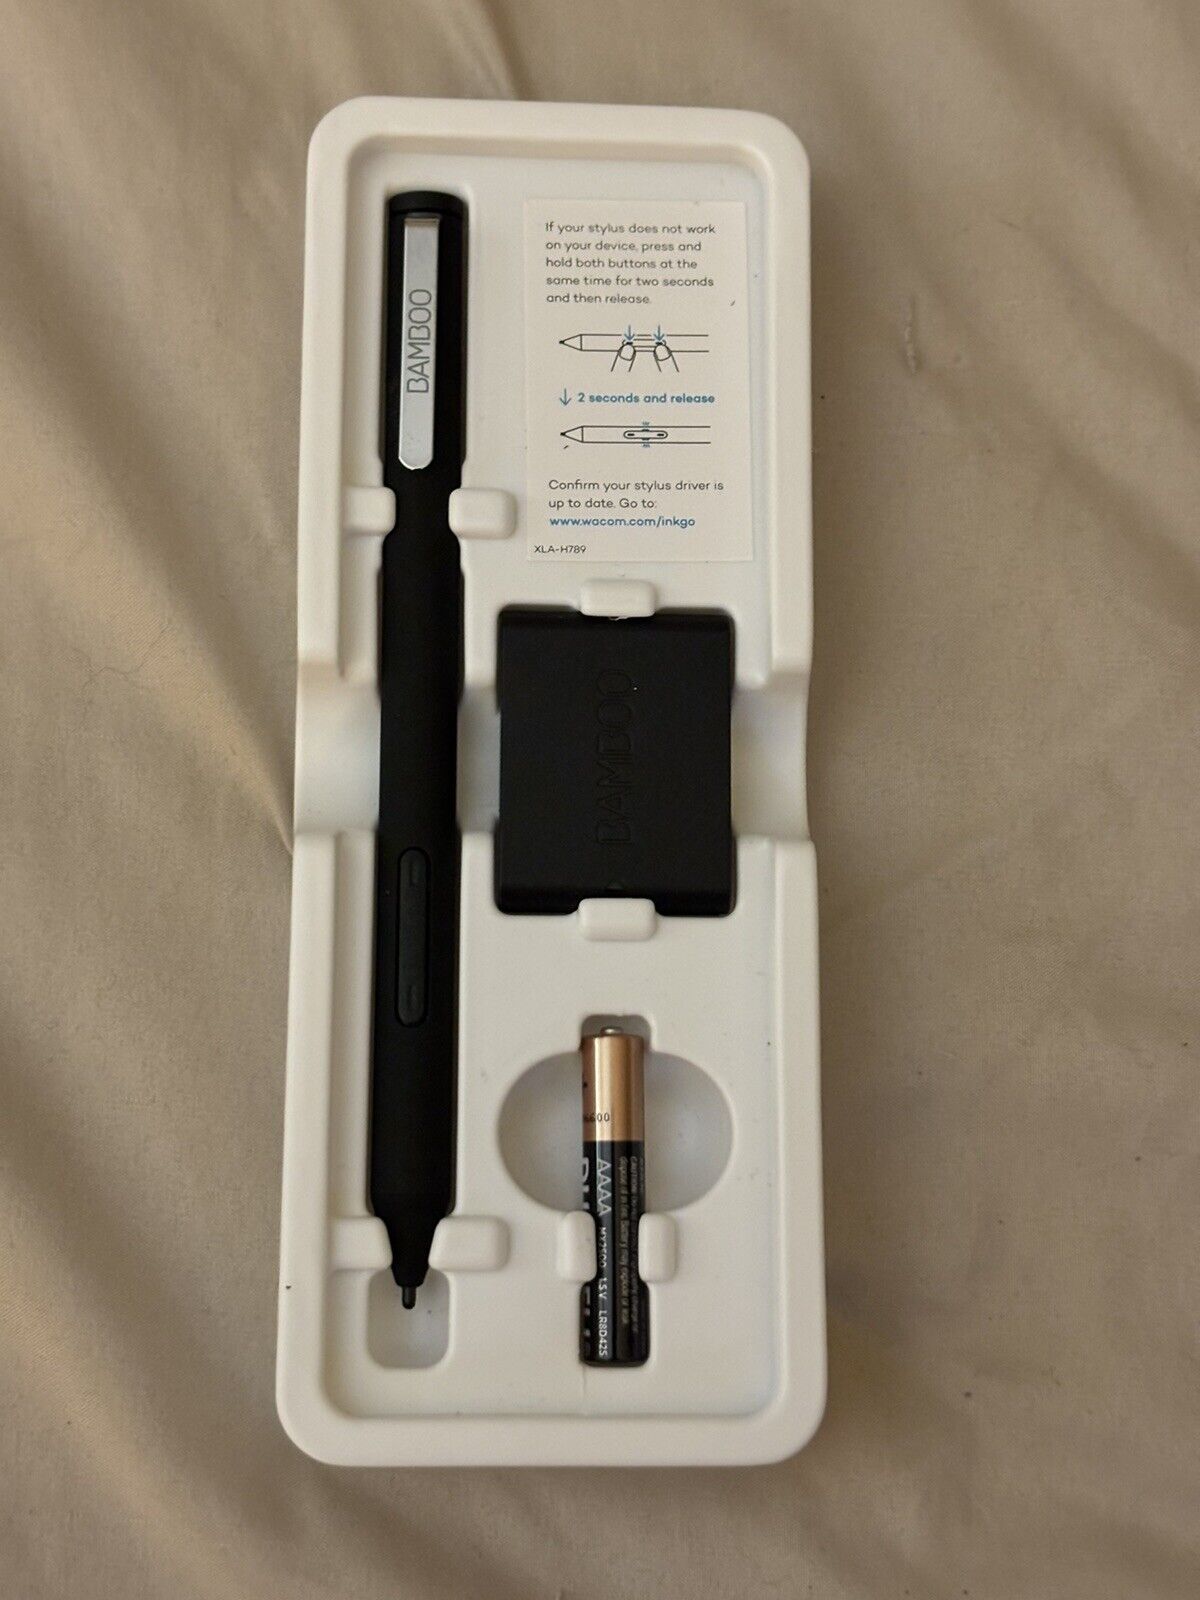 Bamboo Ink Smart Stylus Still In Box Perfect Condition